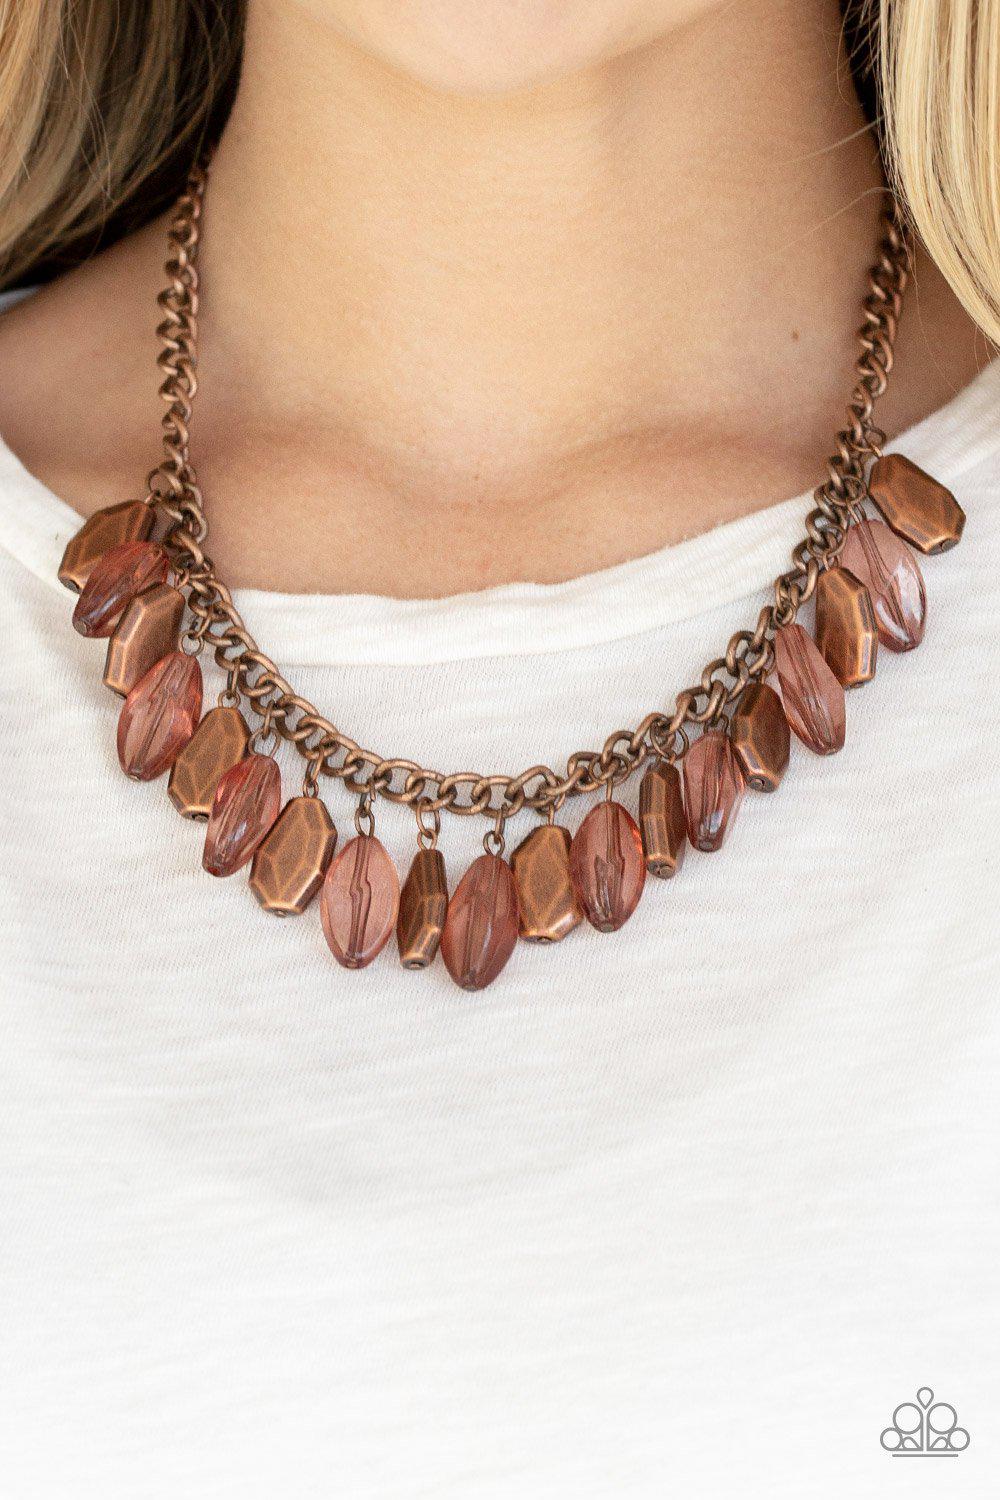 Fringe Fabulous Copper Bead Necklace - Paparazzi Accessories-CarasShop.com - $5 Jewelry by Cara Jewels